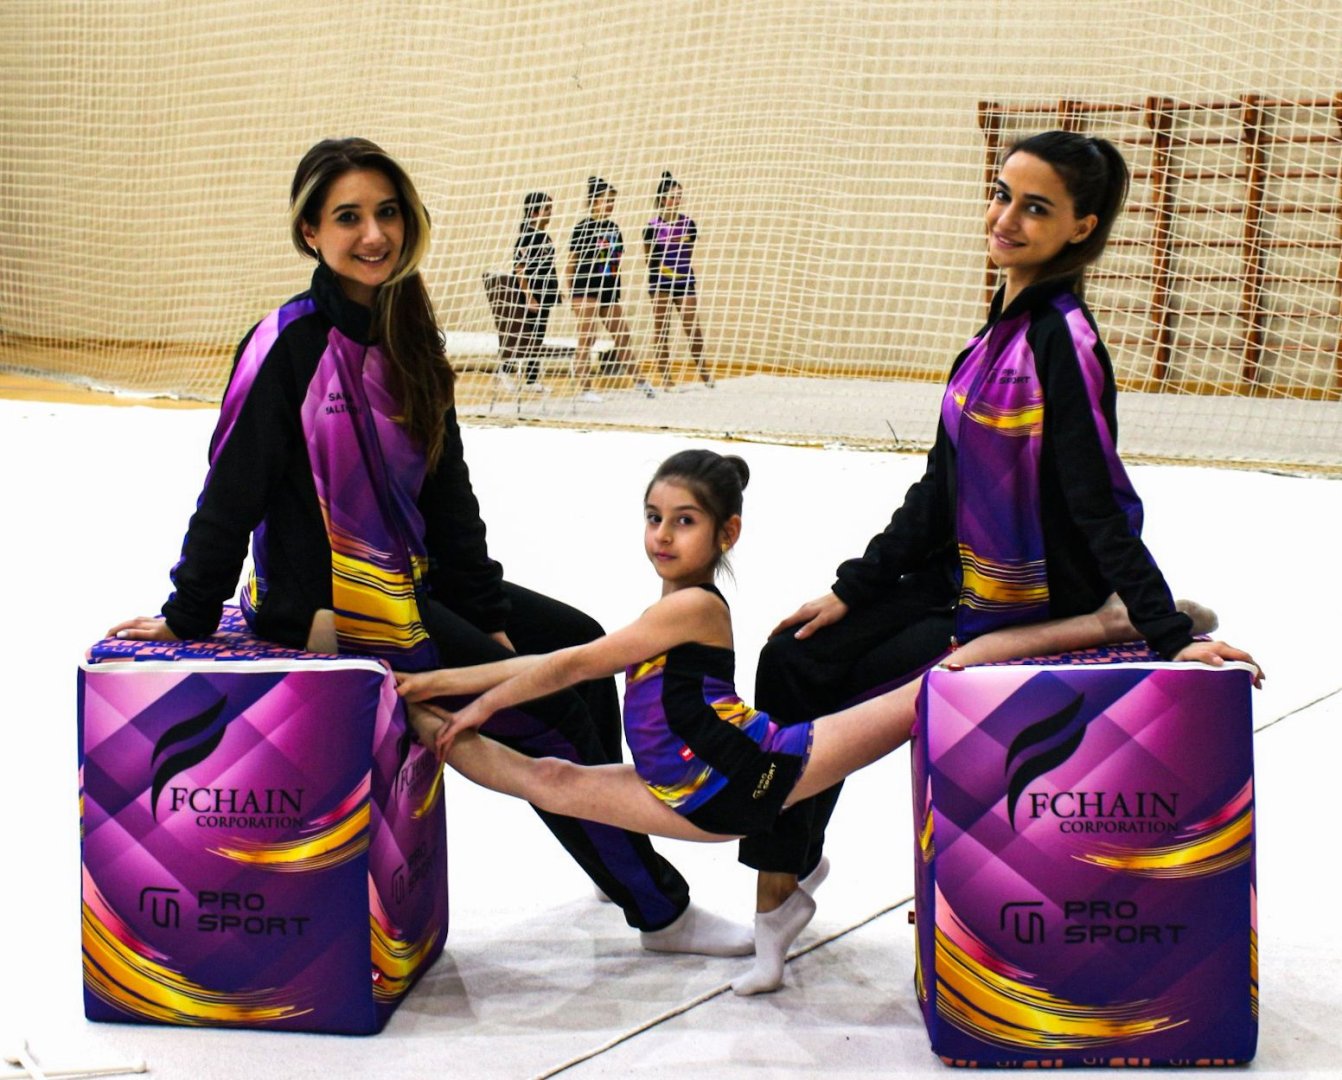 Reportage with FCHAIN'S young and talented gymnast Zuleikha Shabanova